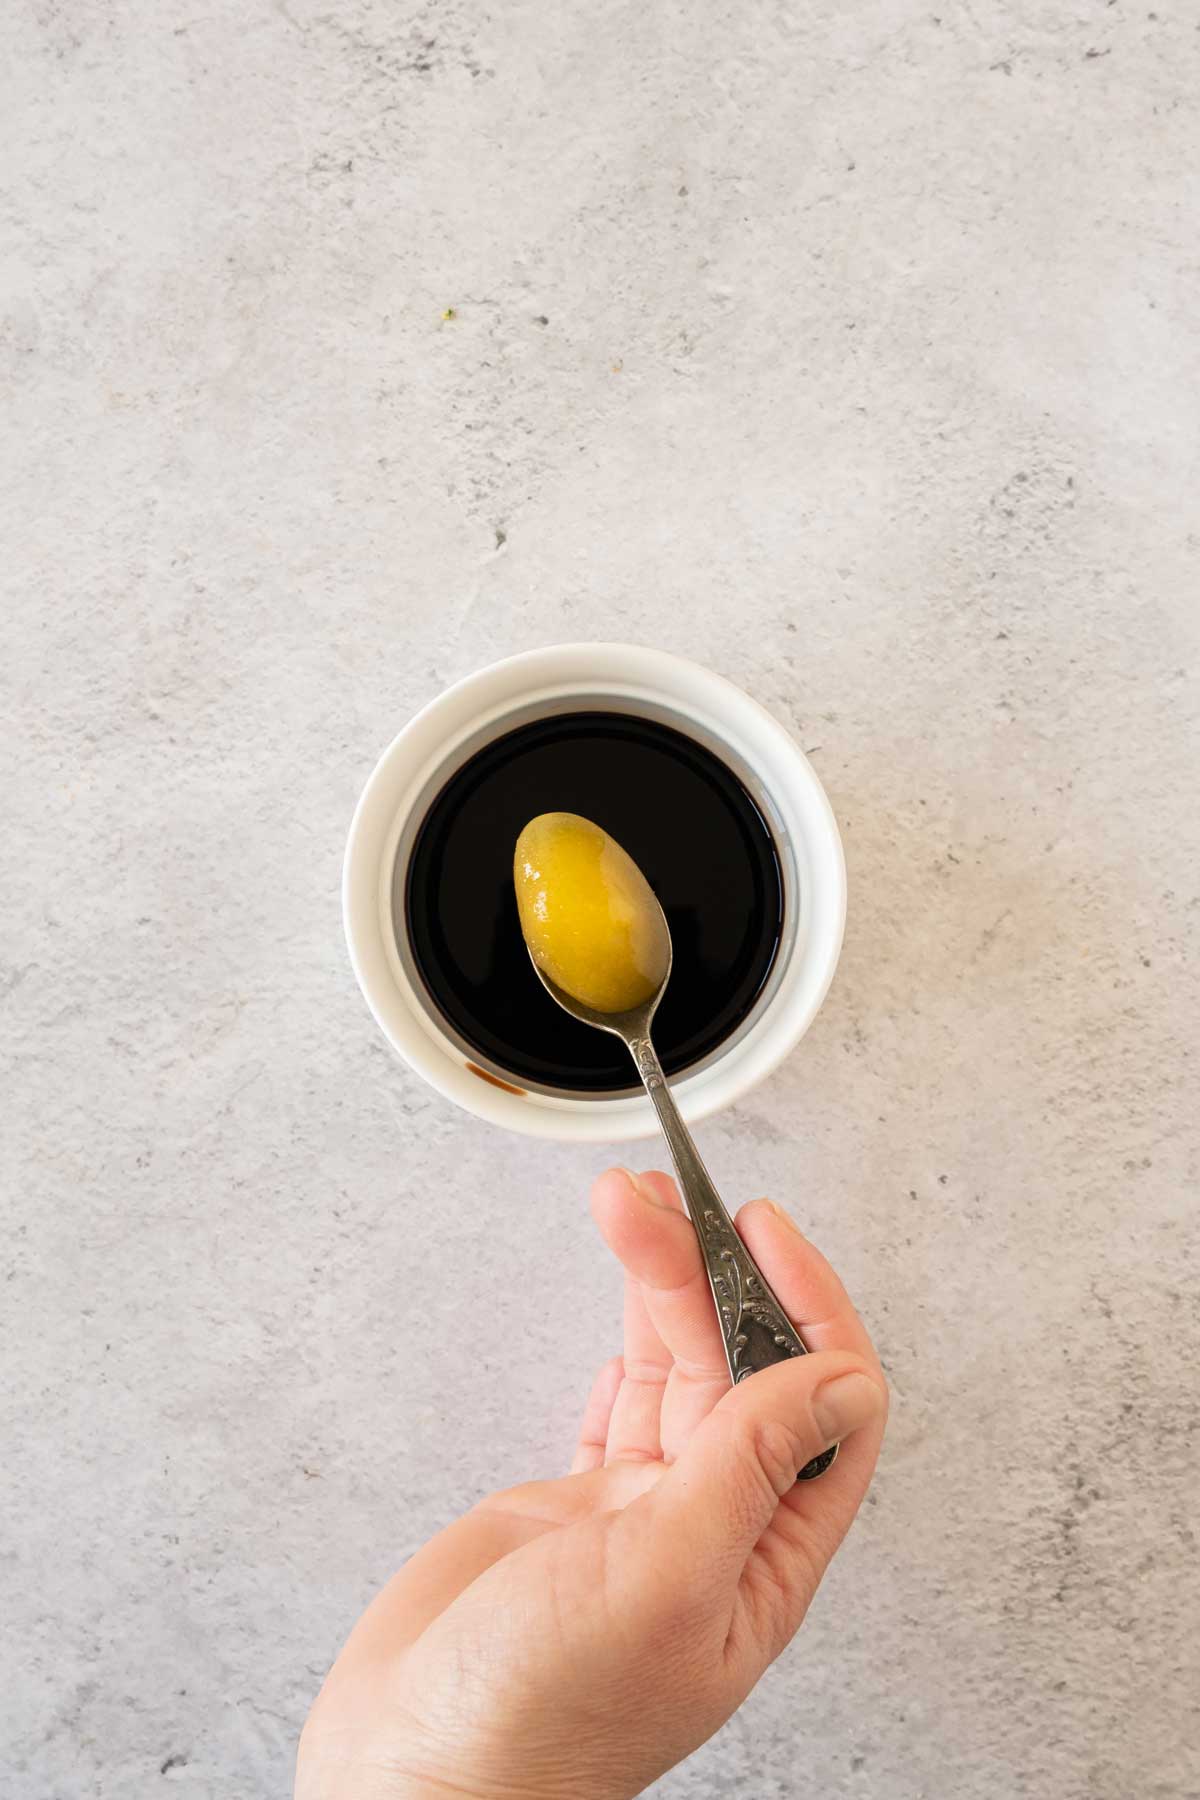 A hand holding a spoon with honey in it over a bowl of Balsamic Vinegar.